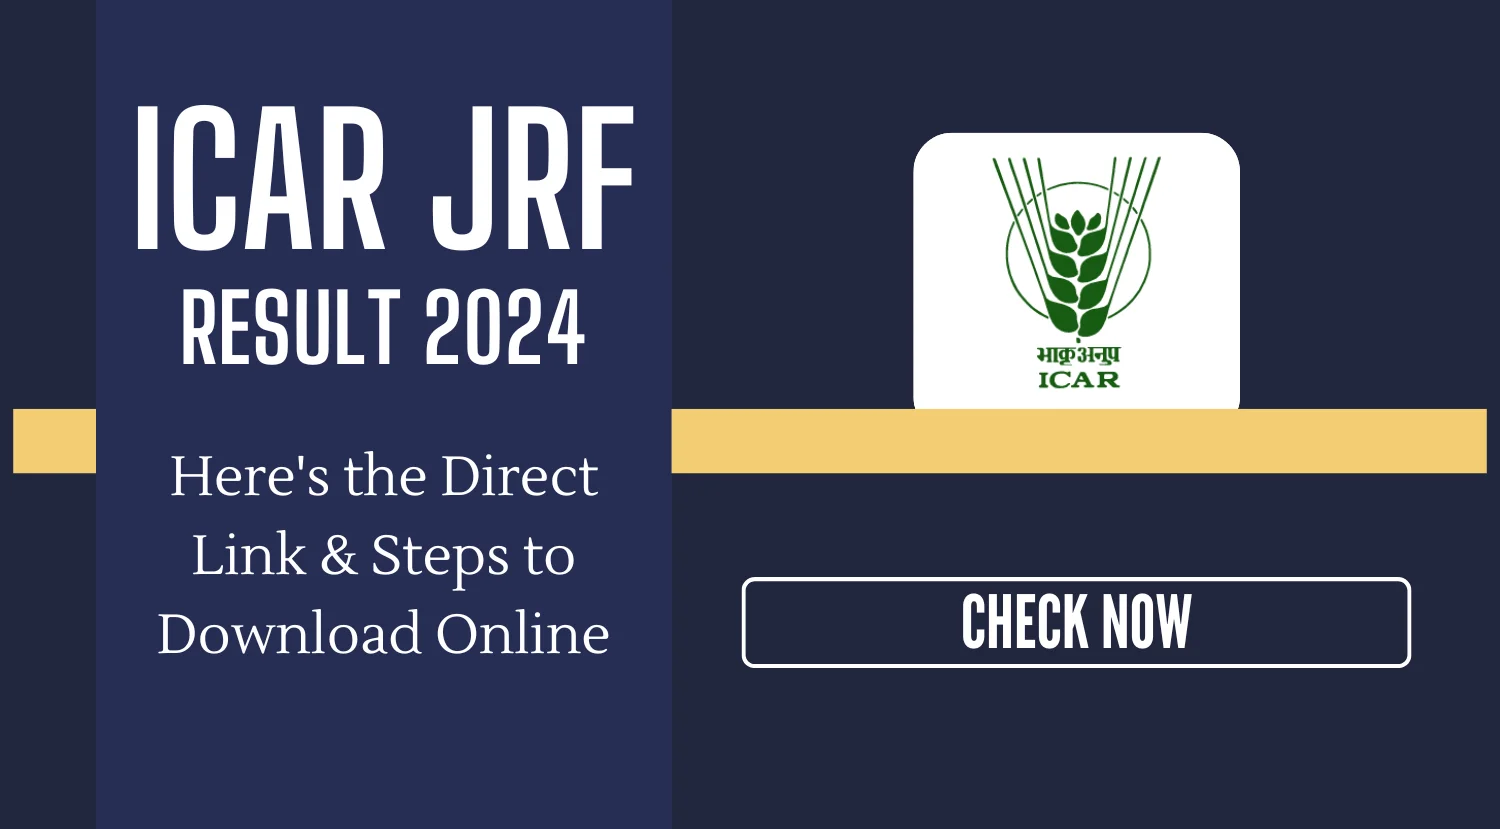 ICAR JRF Result 2024 Heres the Direct Link Steps to Download Online